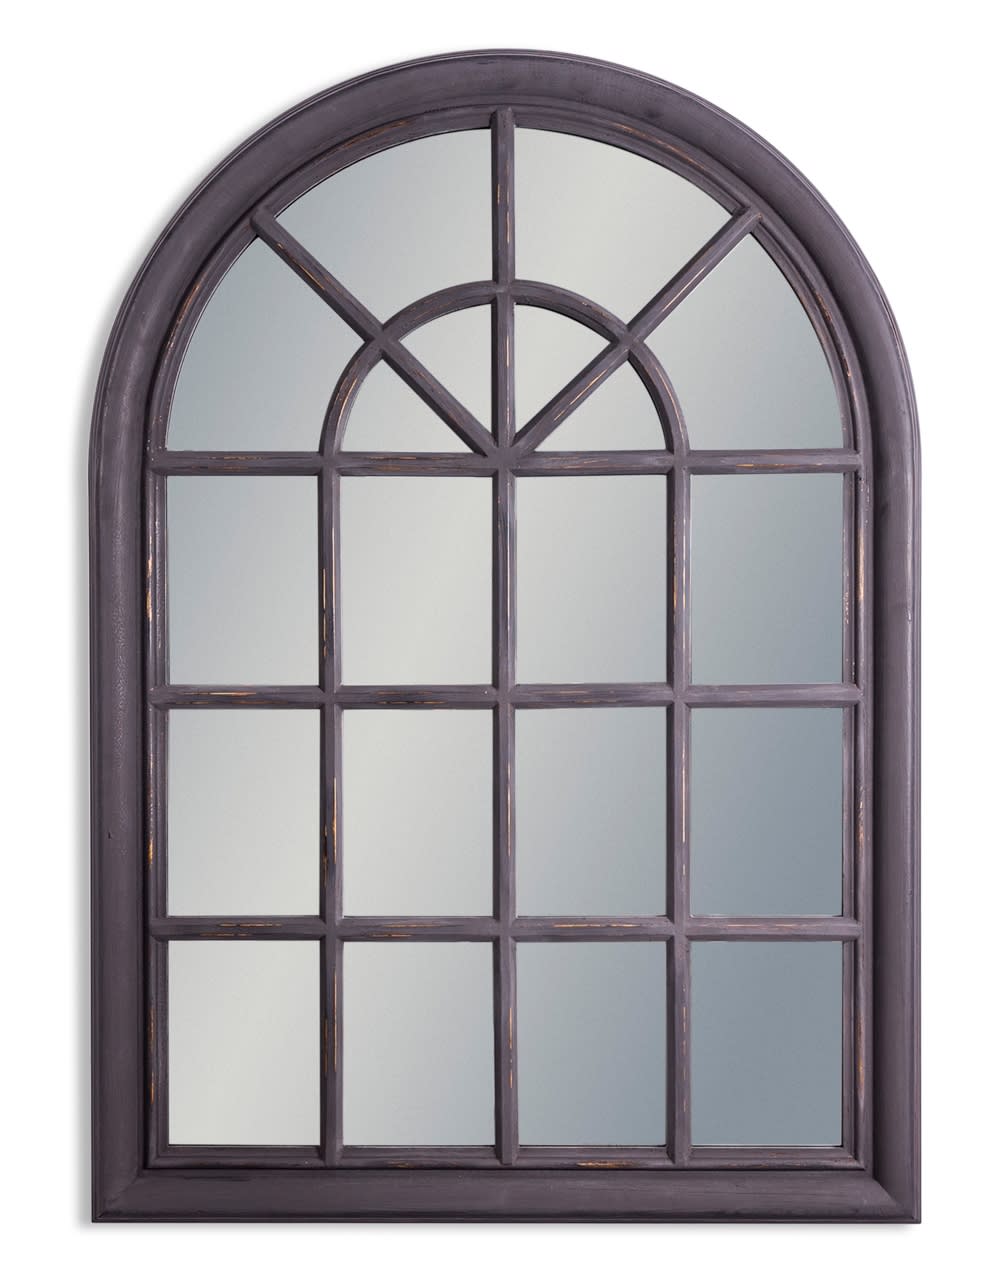 Rustic black arched window style mirror